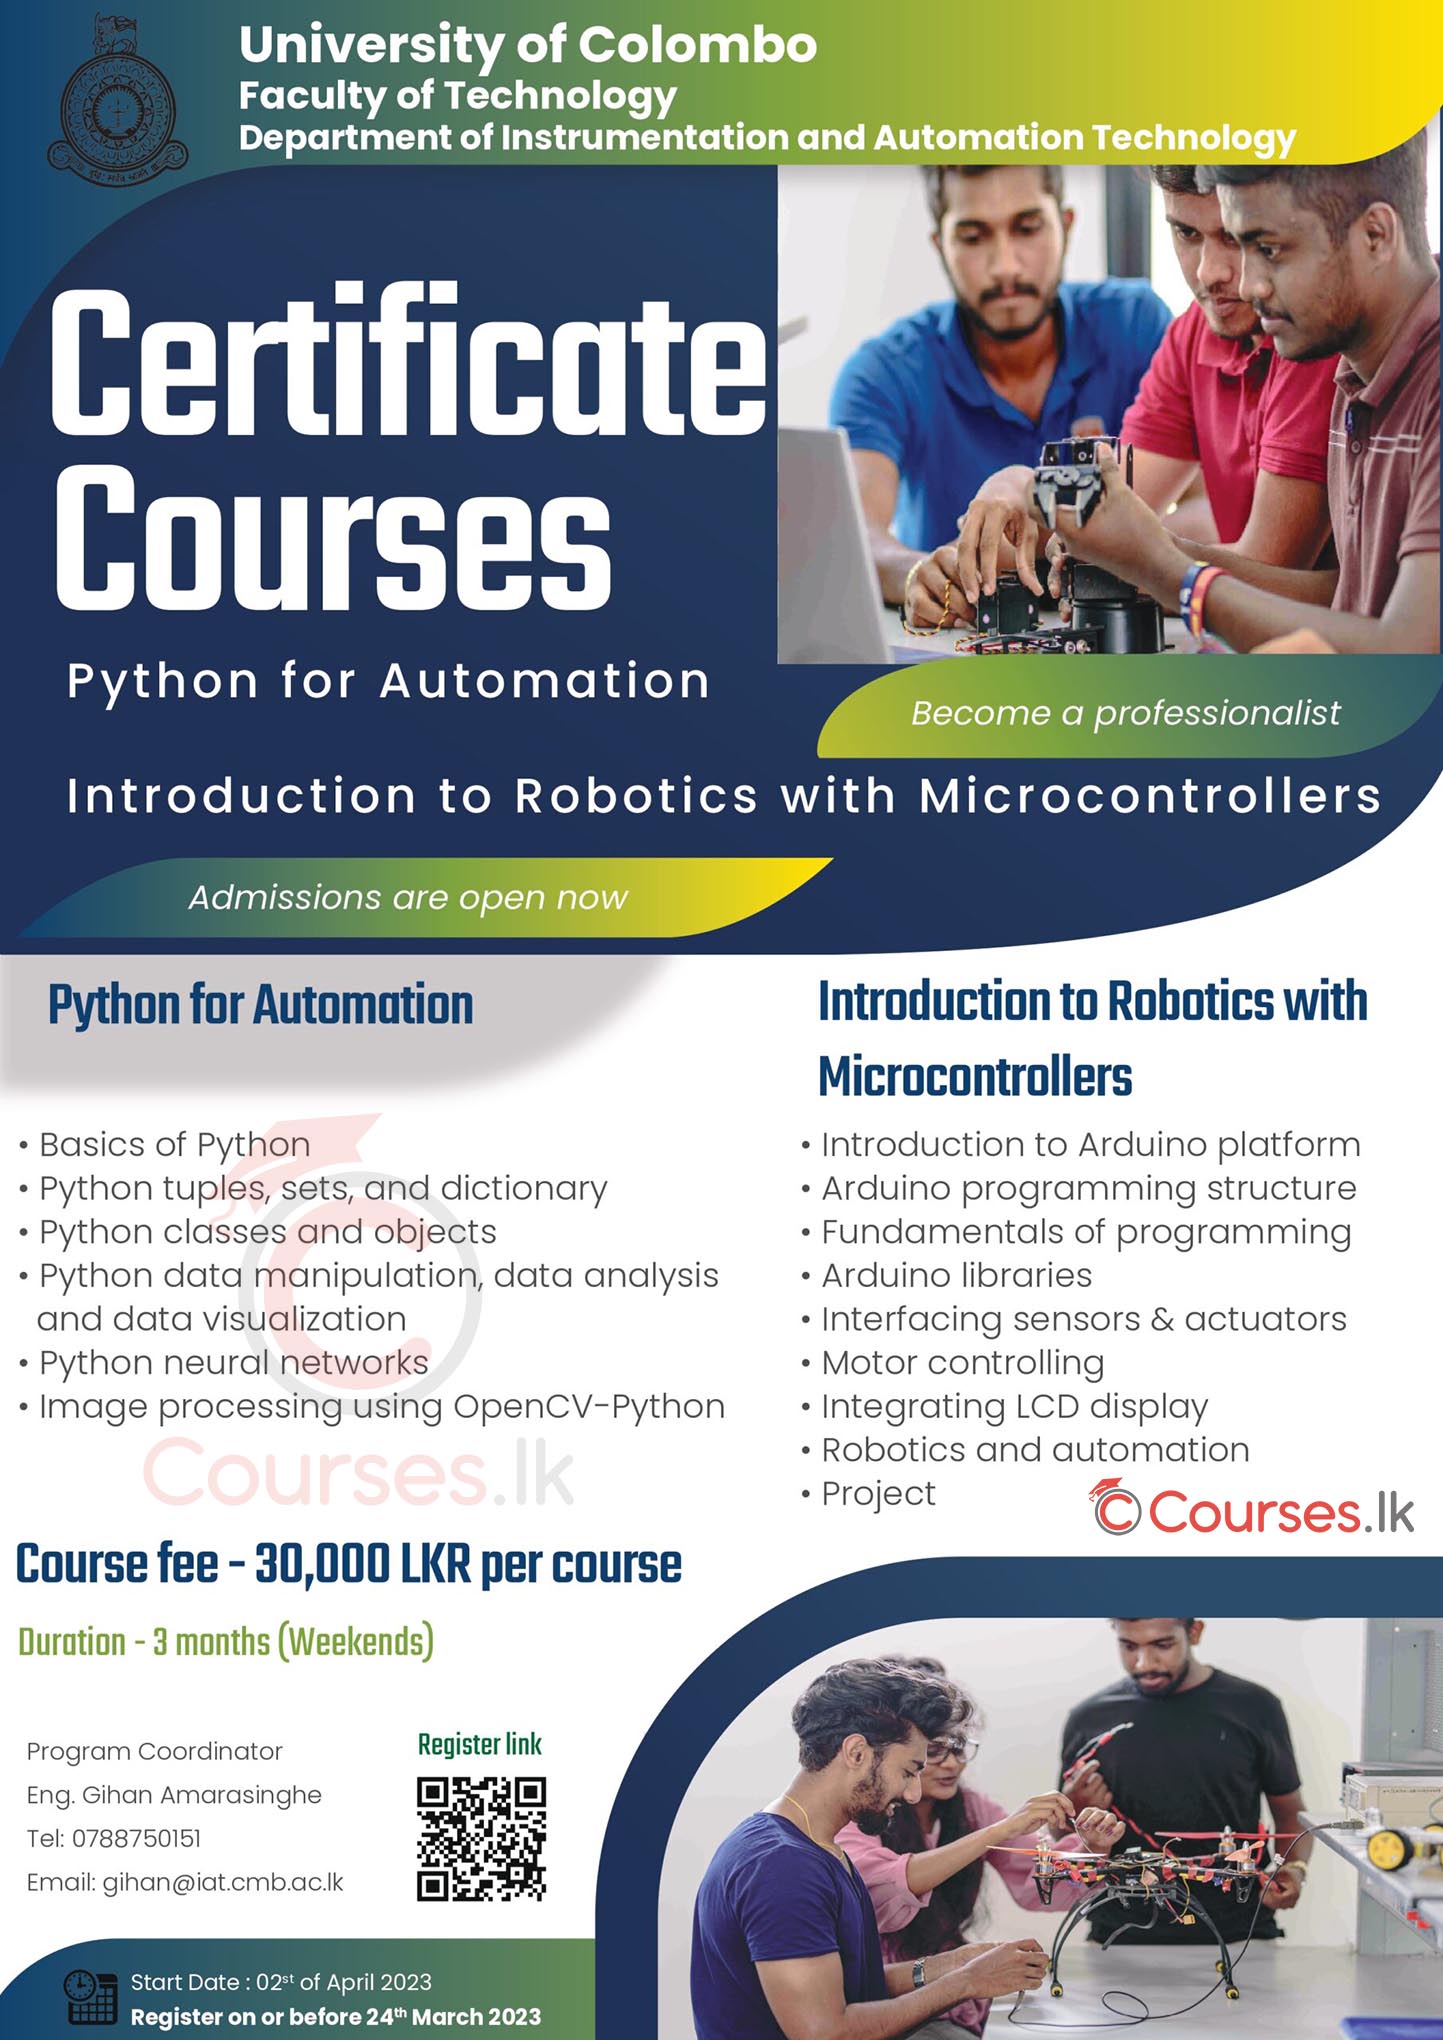 Certificate Course in Python for Automation / Introduction to Robotics with Microcontrollers 2023 - University of Colombo